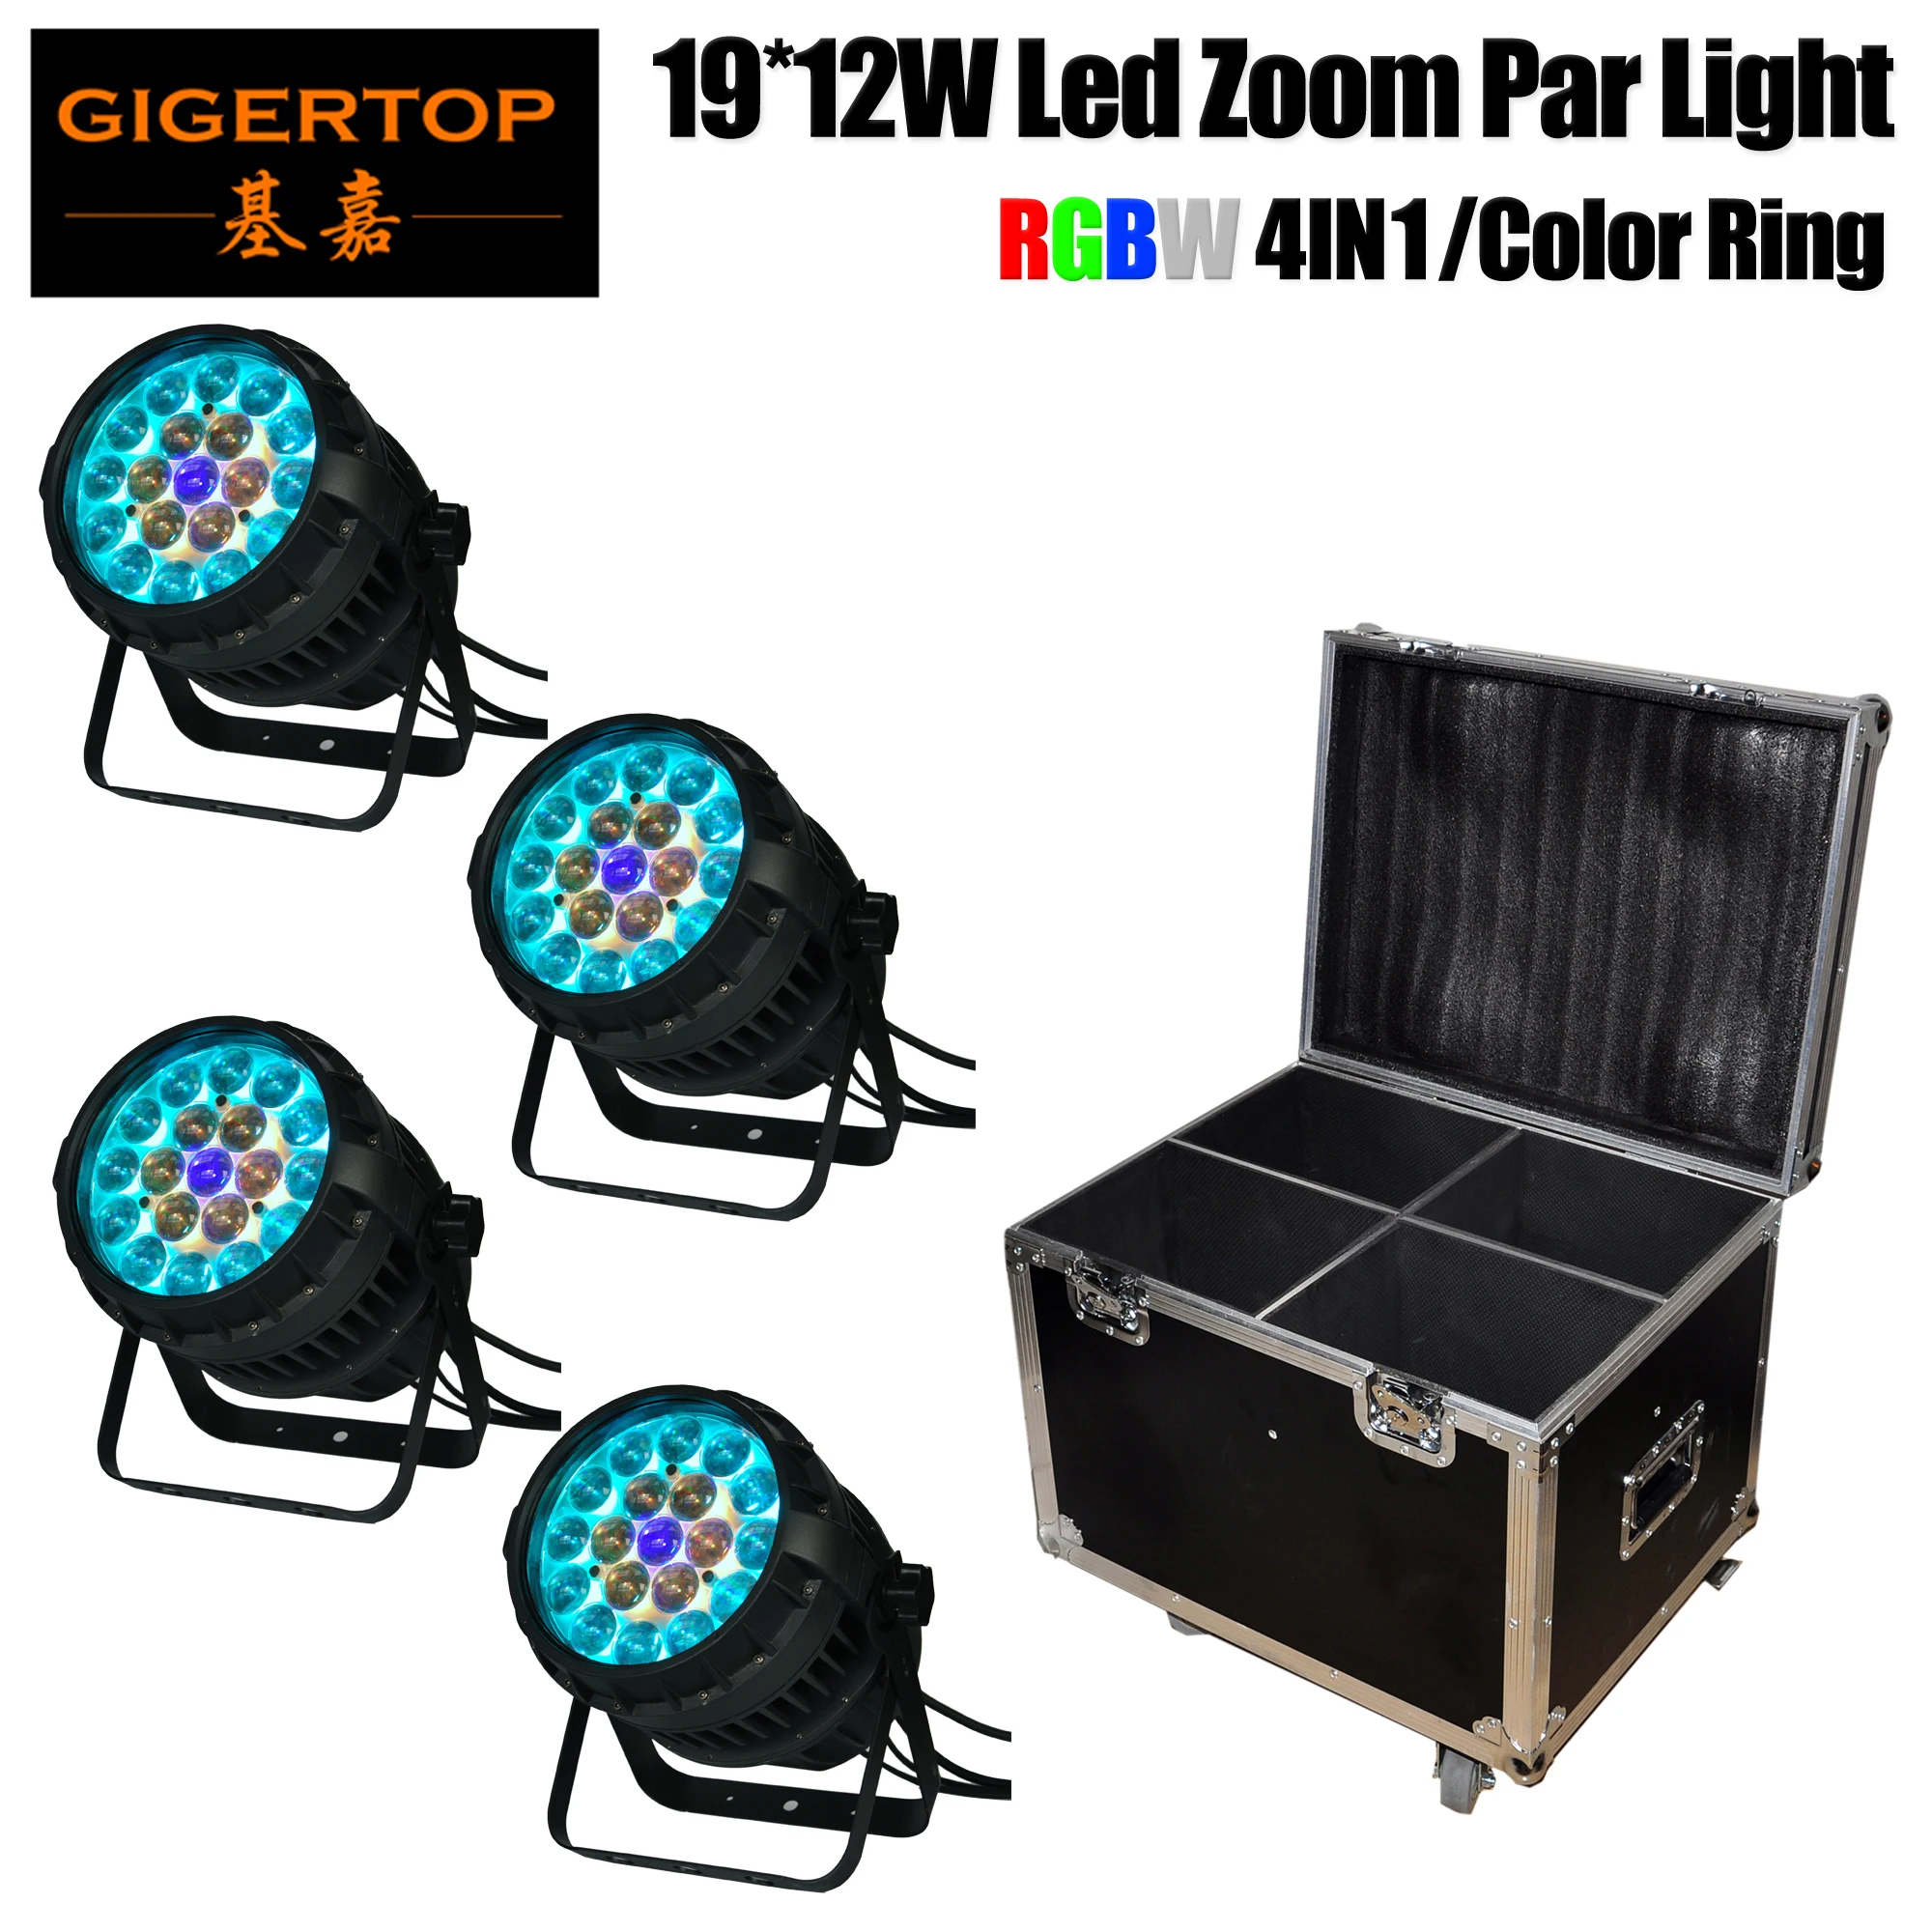 

4in1 Stackable Road Case Pack Waterproof Led Zoom Par Light RGBW 4IN1 Color Beam/Wash 2in1 Effect 10-50 Degree Zoom 19x12W Leds